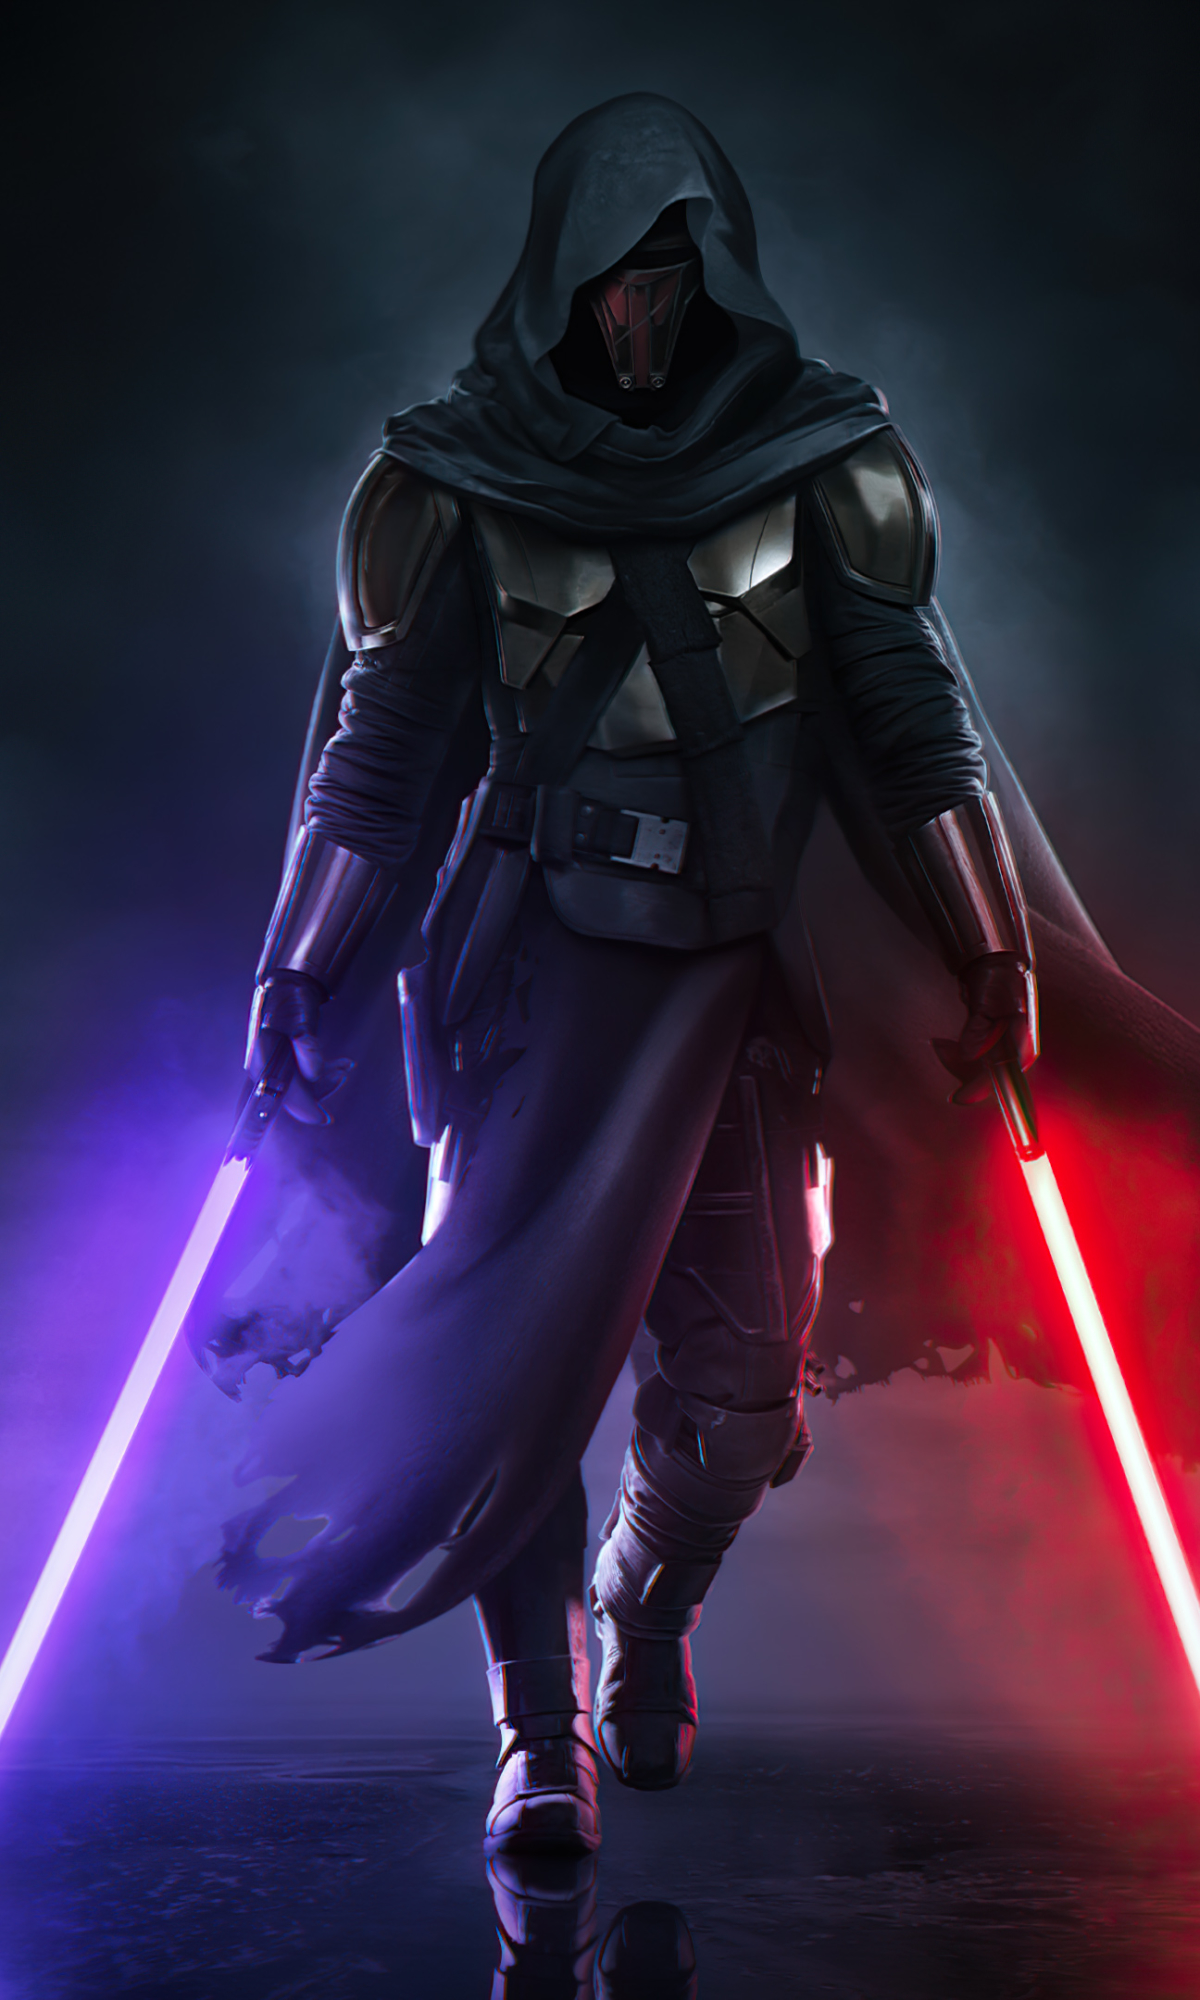 Sith Phone Wallpapers